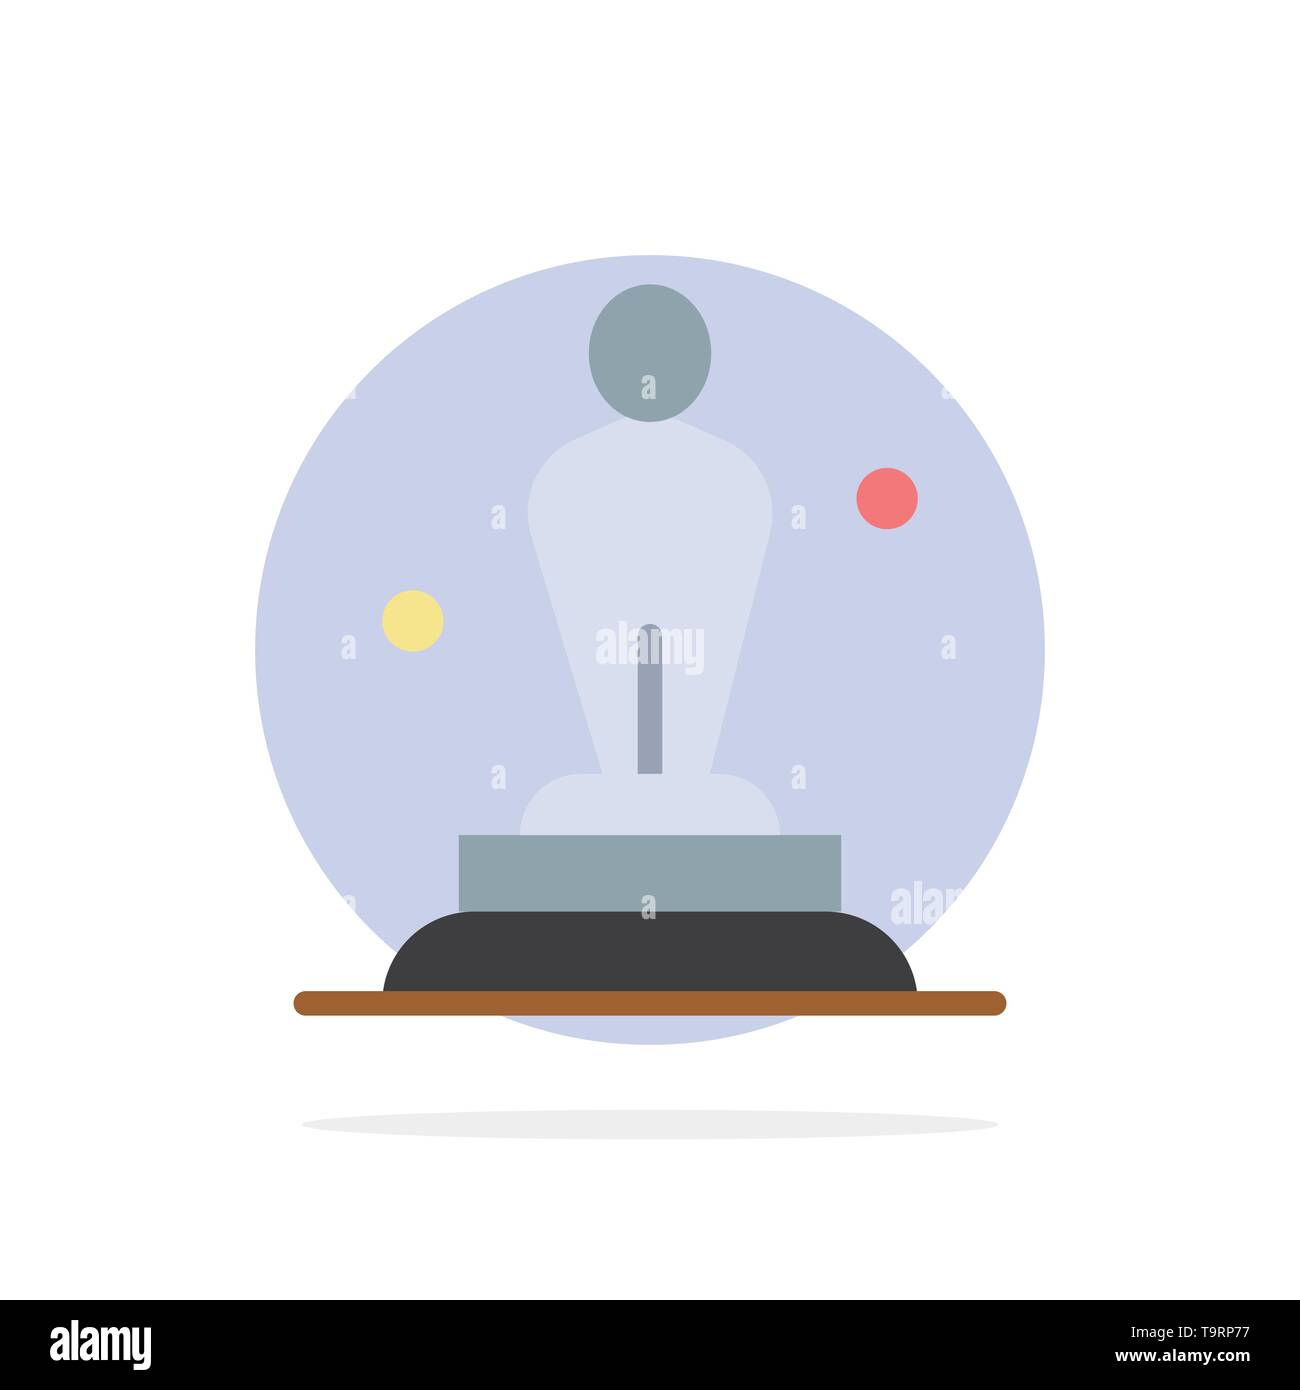 Academy, Award, Oscar, Statue, Trophy Abstract Circle Background Flat color Icon Stock Vector